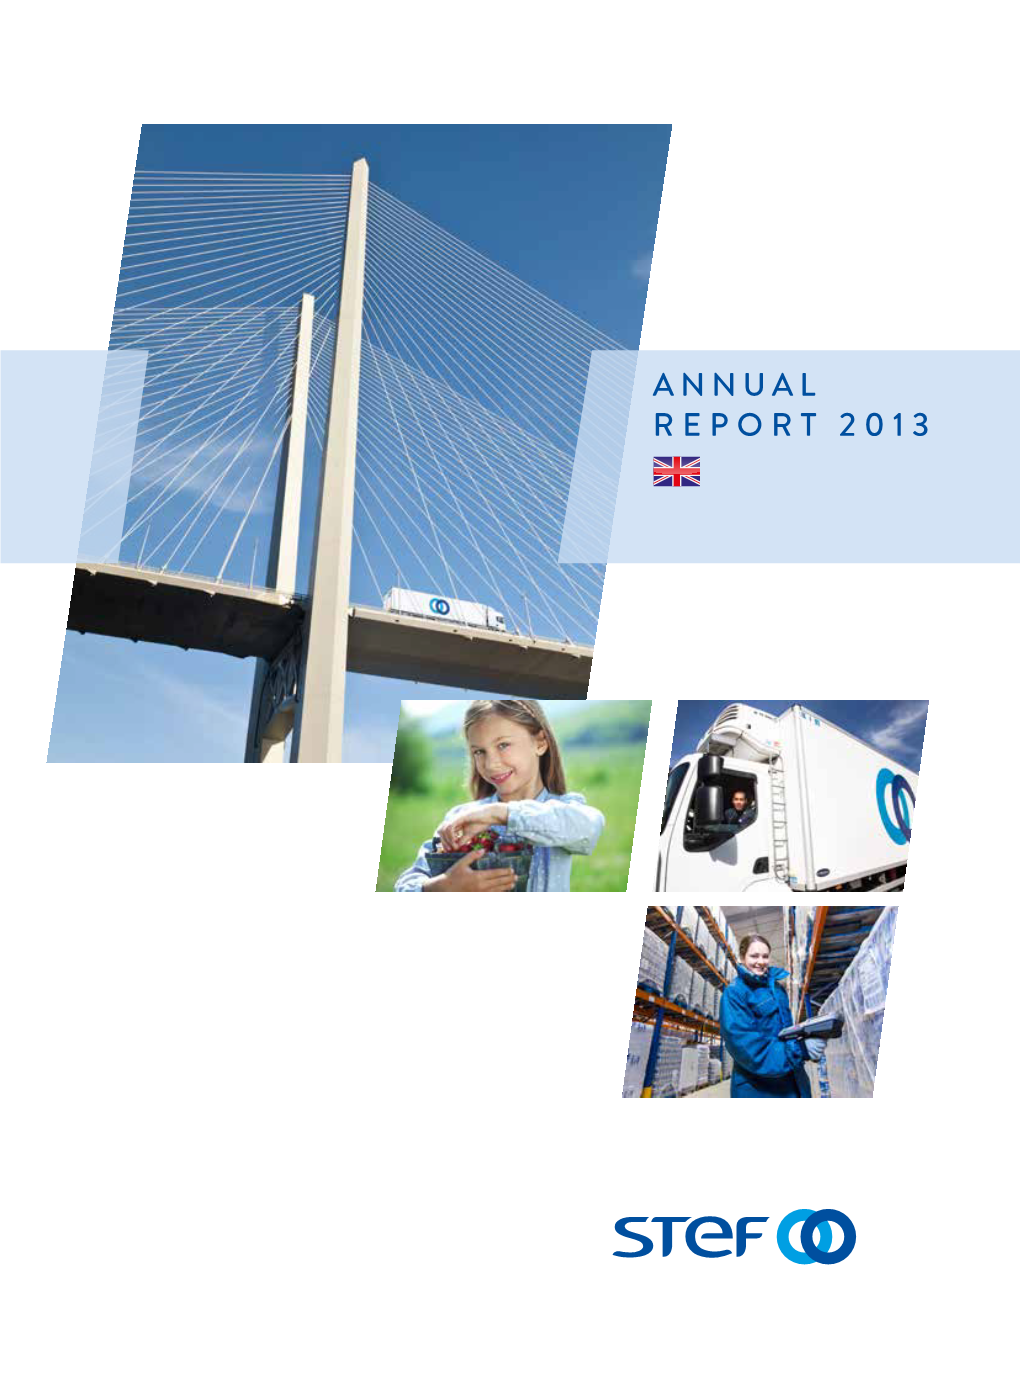 Annual Report 2013 Contents